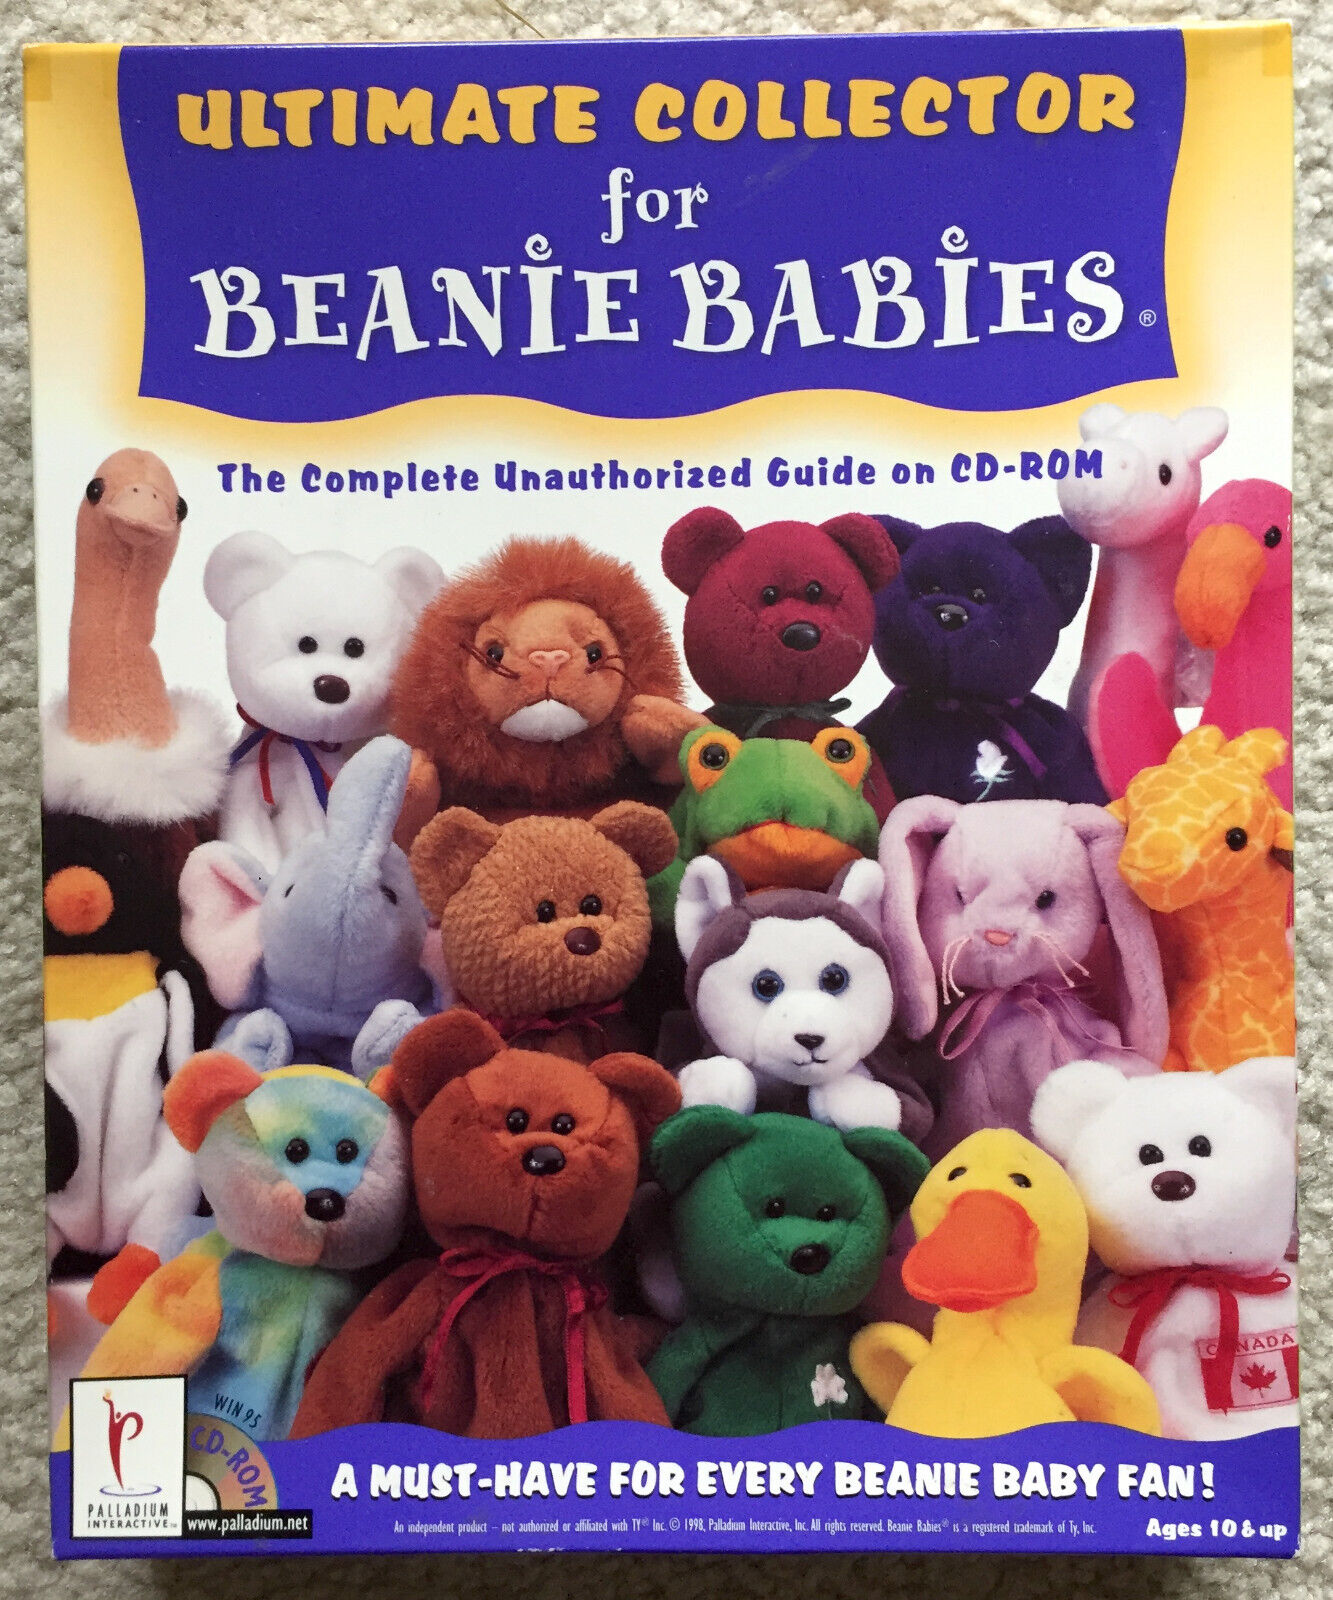 Ultimate Collector for Beanie Babies - Unauthorized Guide on CD-ROM